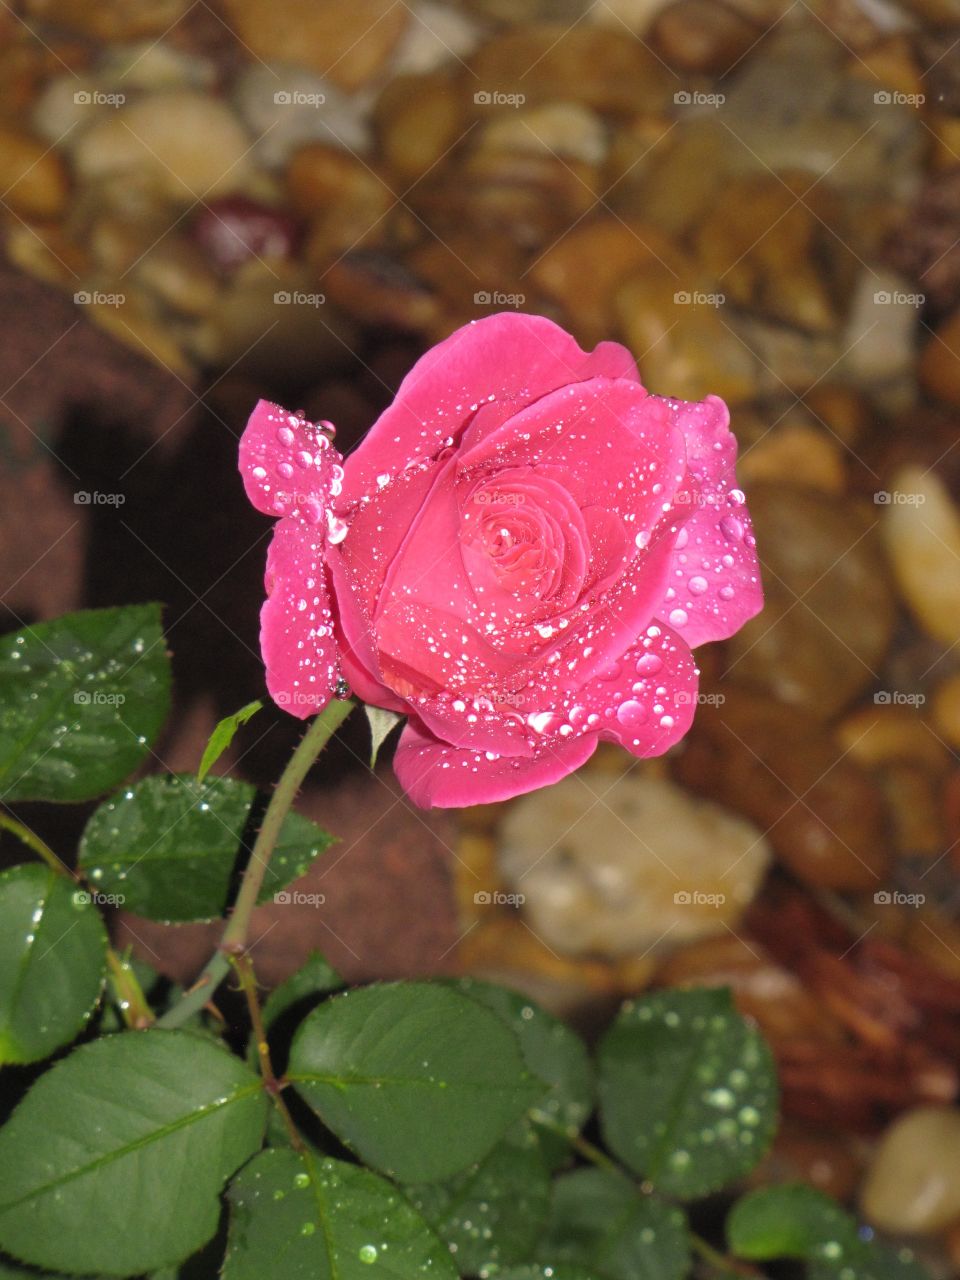 Flower with dew on 